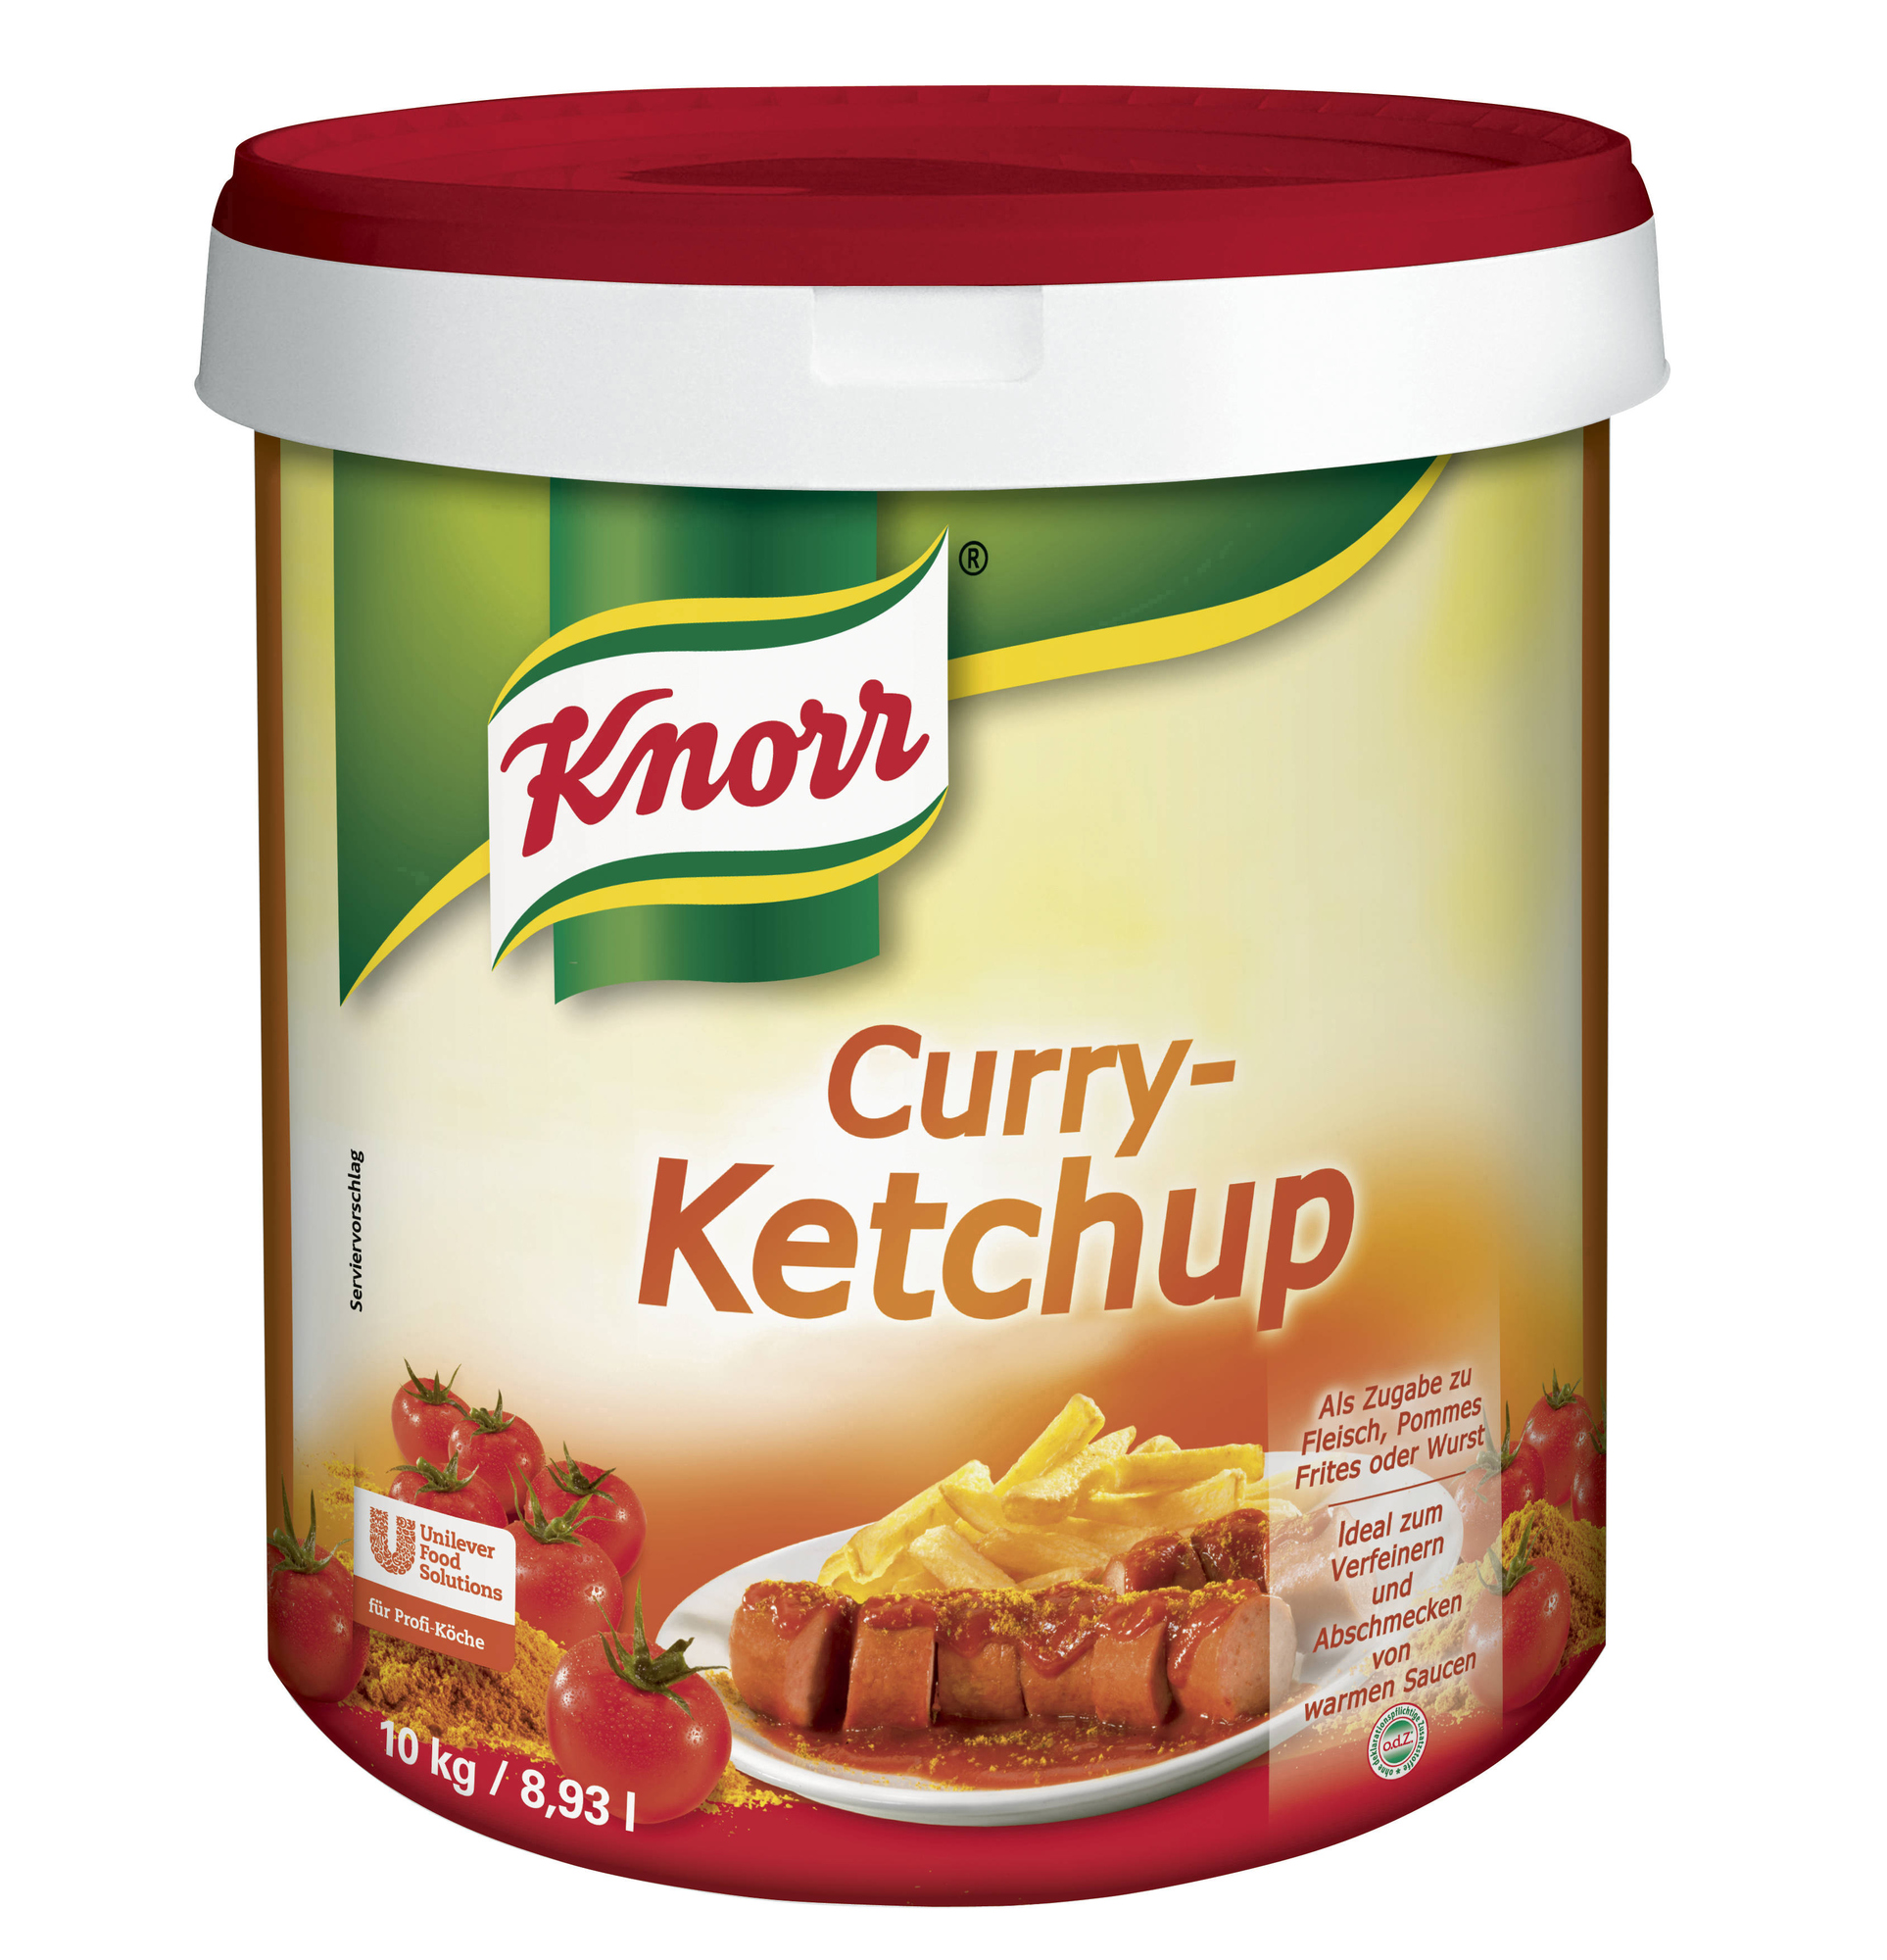 Curry-Ketchup 10kg